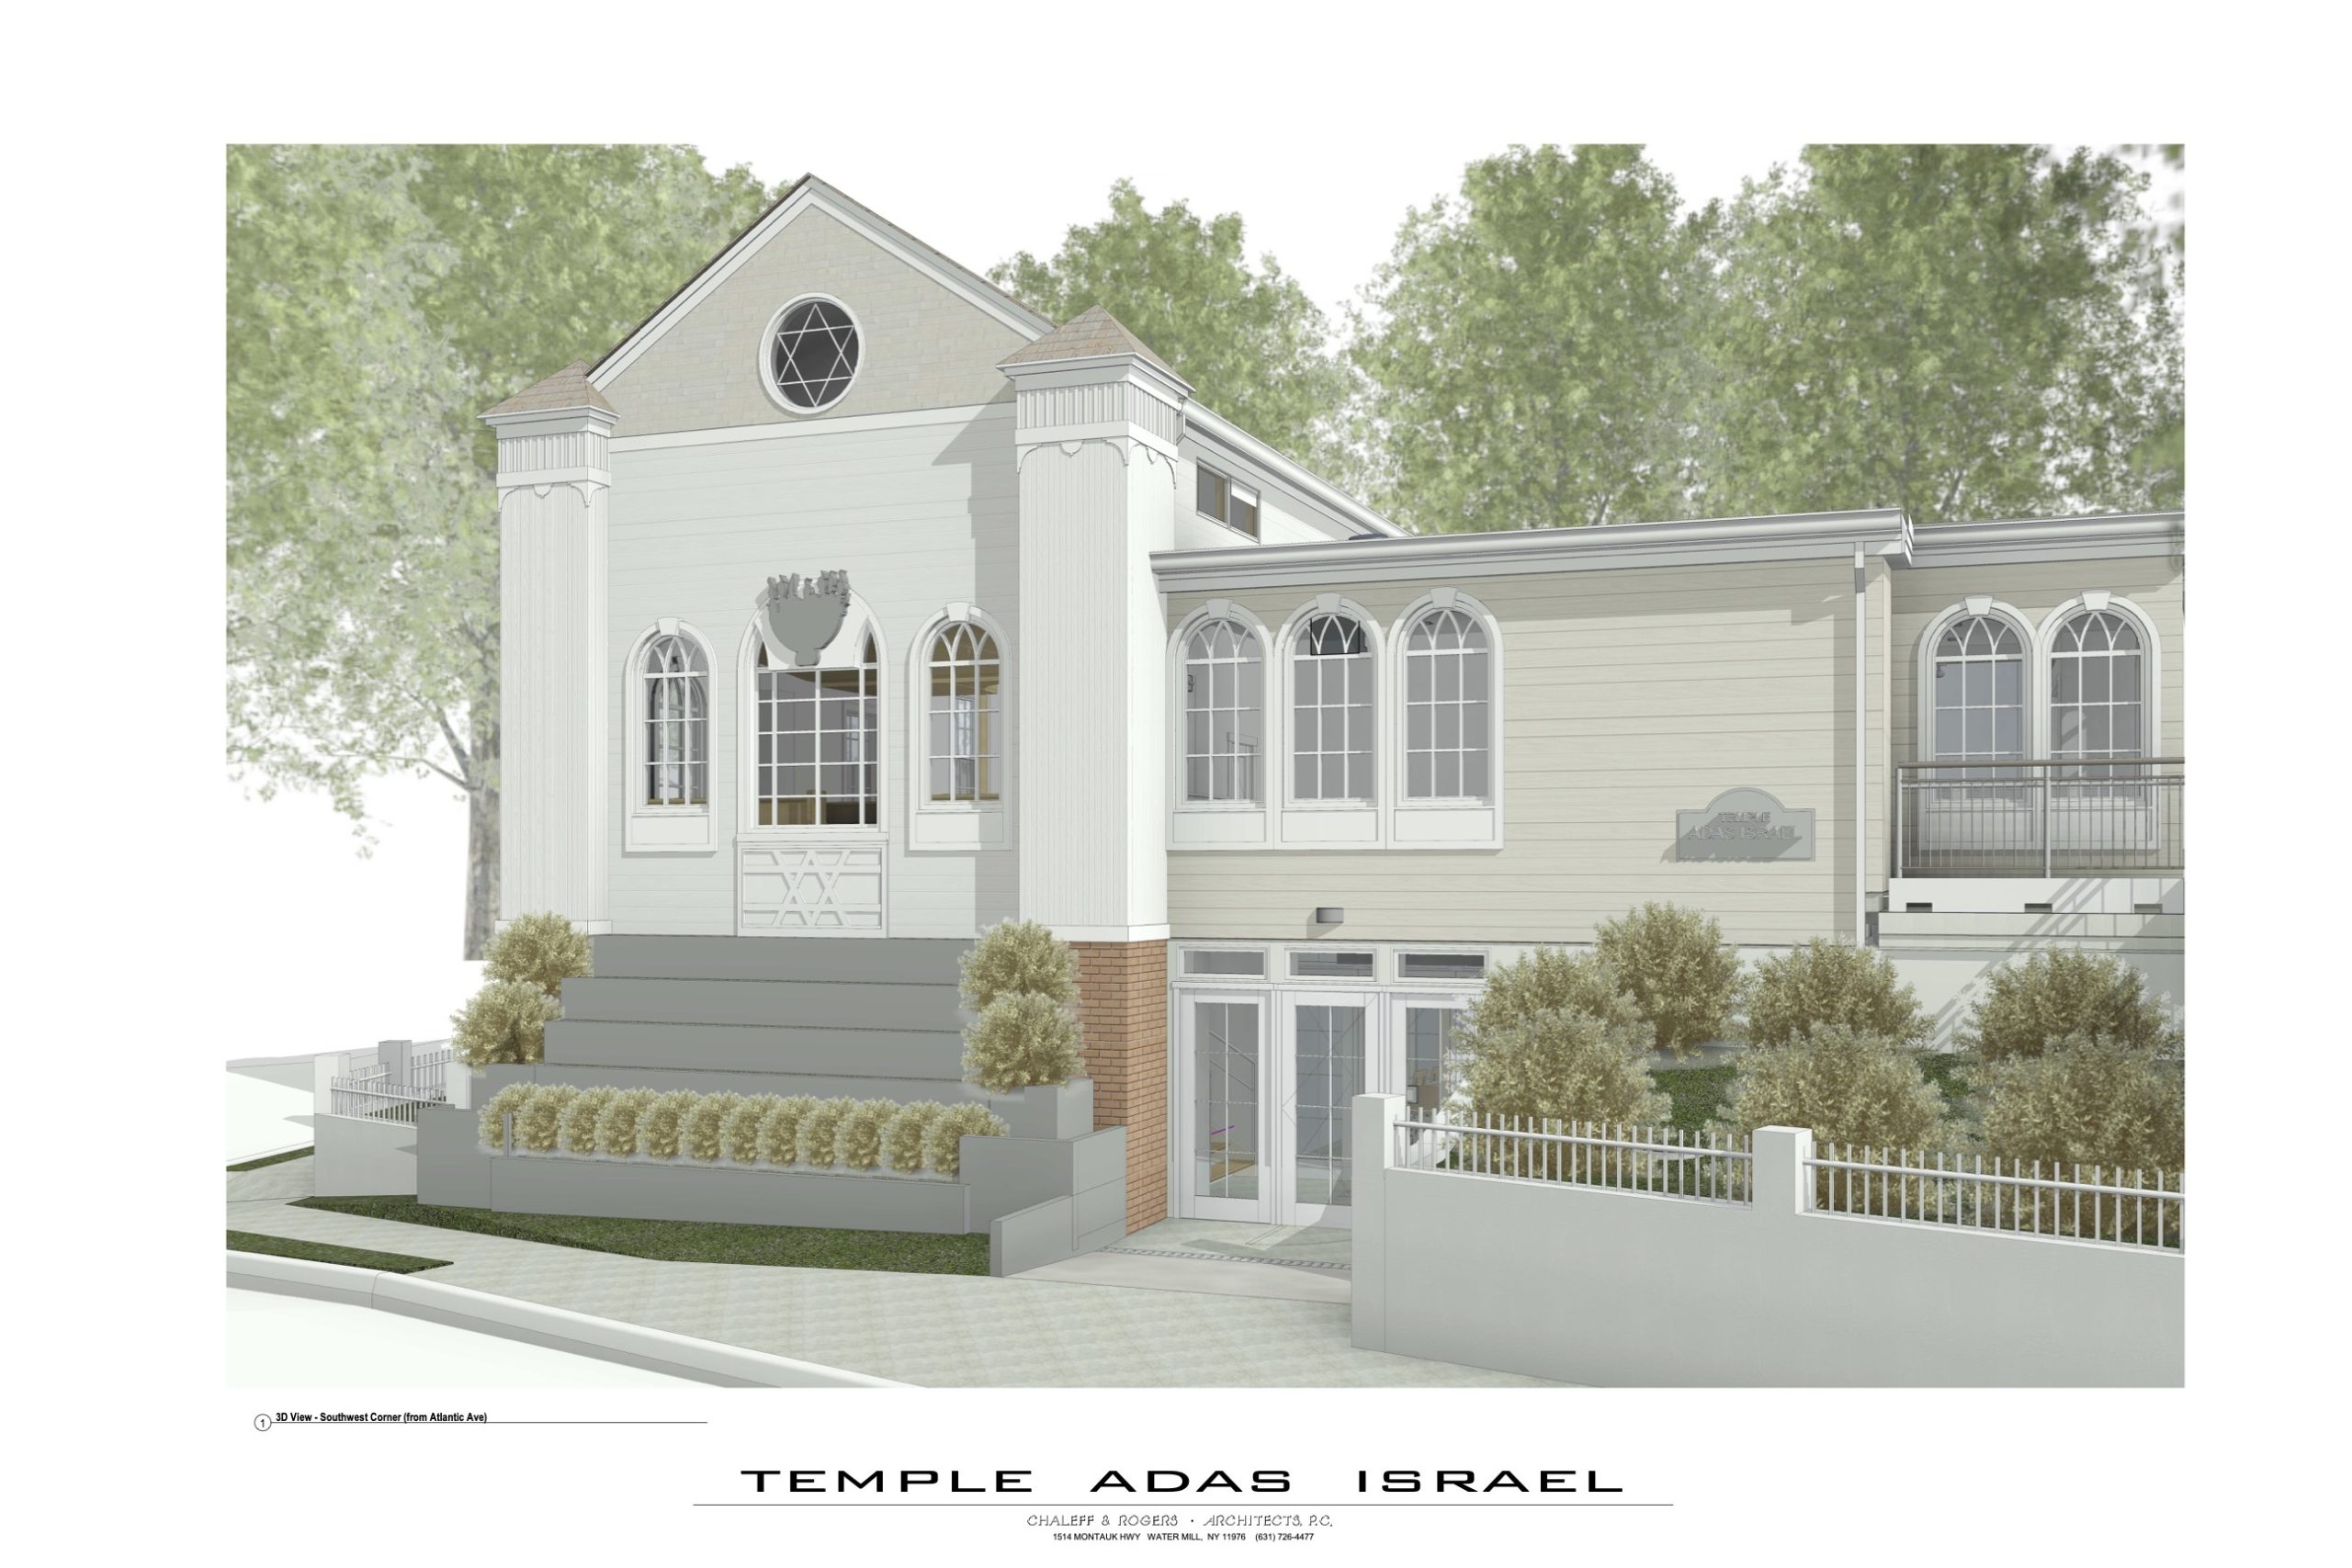 A rendering of the completed renovation and restoration of Temple Adas Israel in Sag Harbor.